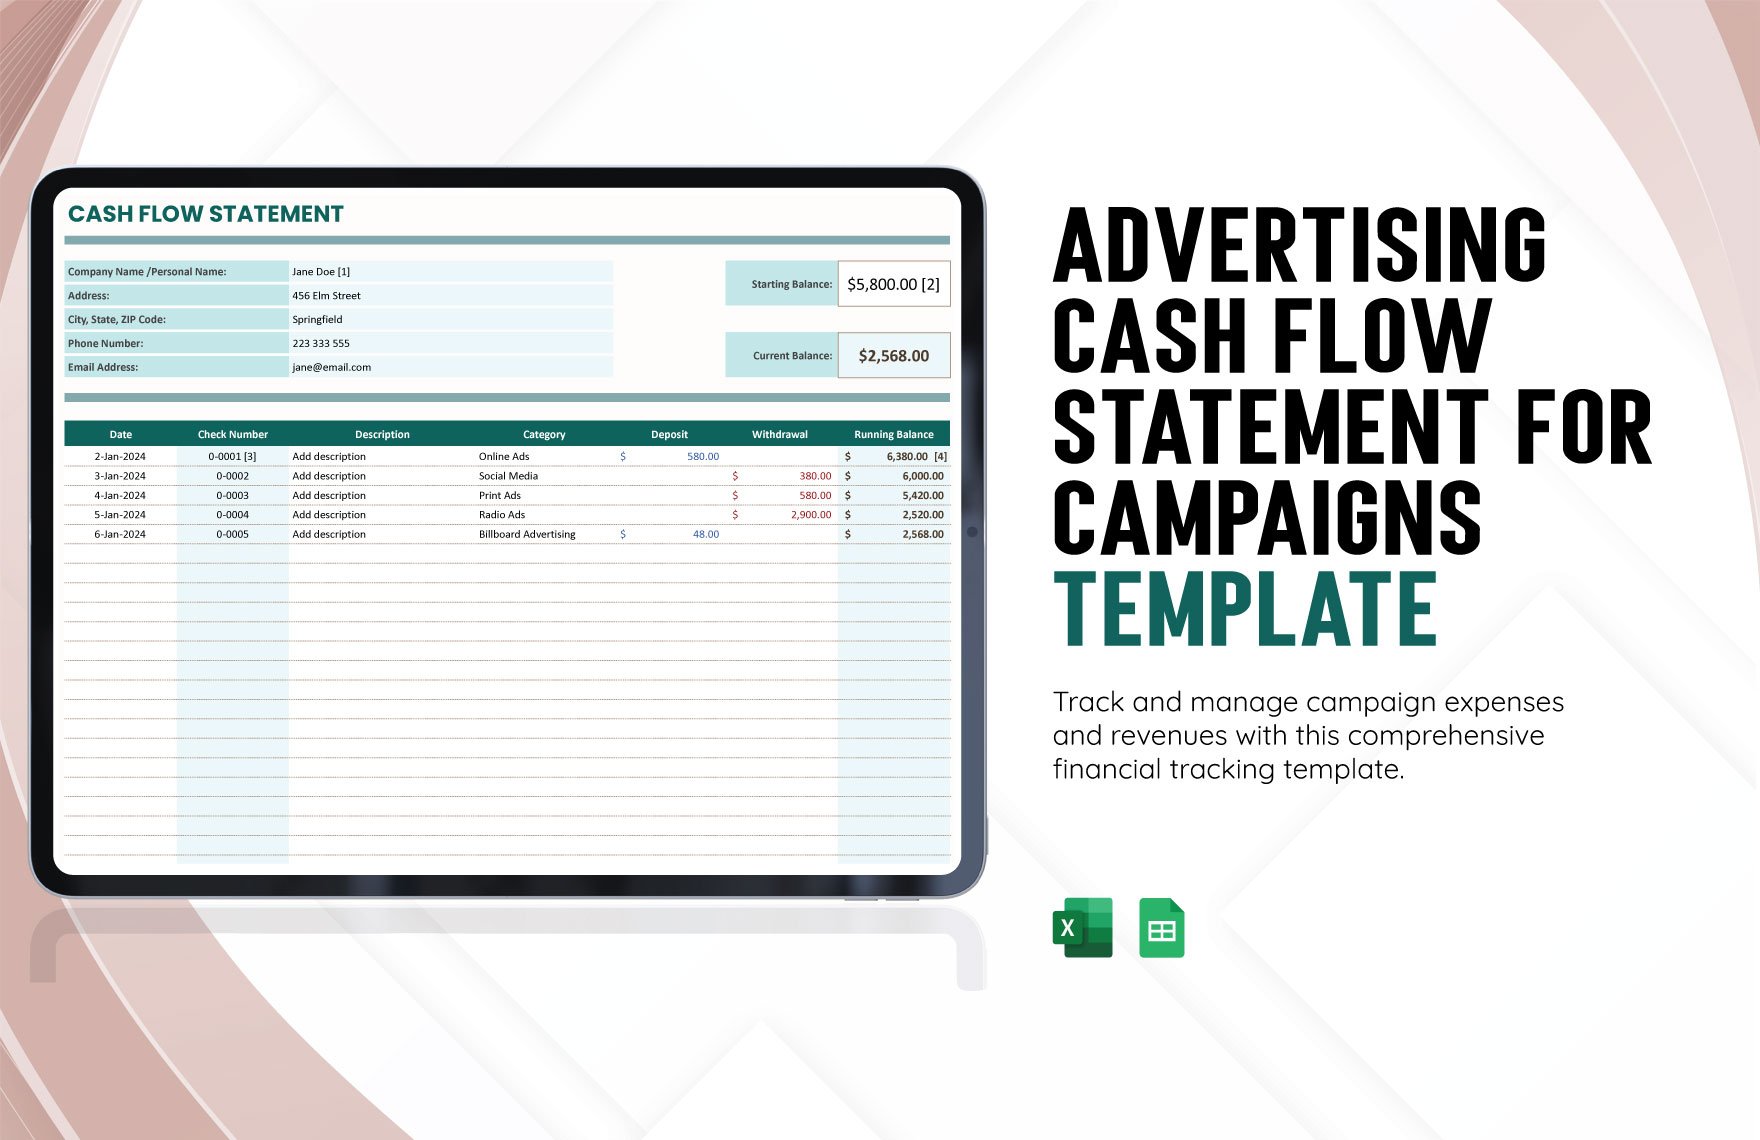 Advertising Cash Flow Statement for Campaigns Template in Excel, Google Sheets